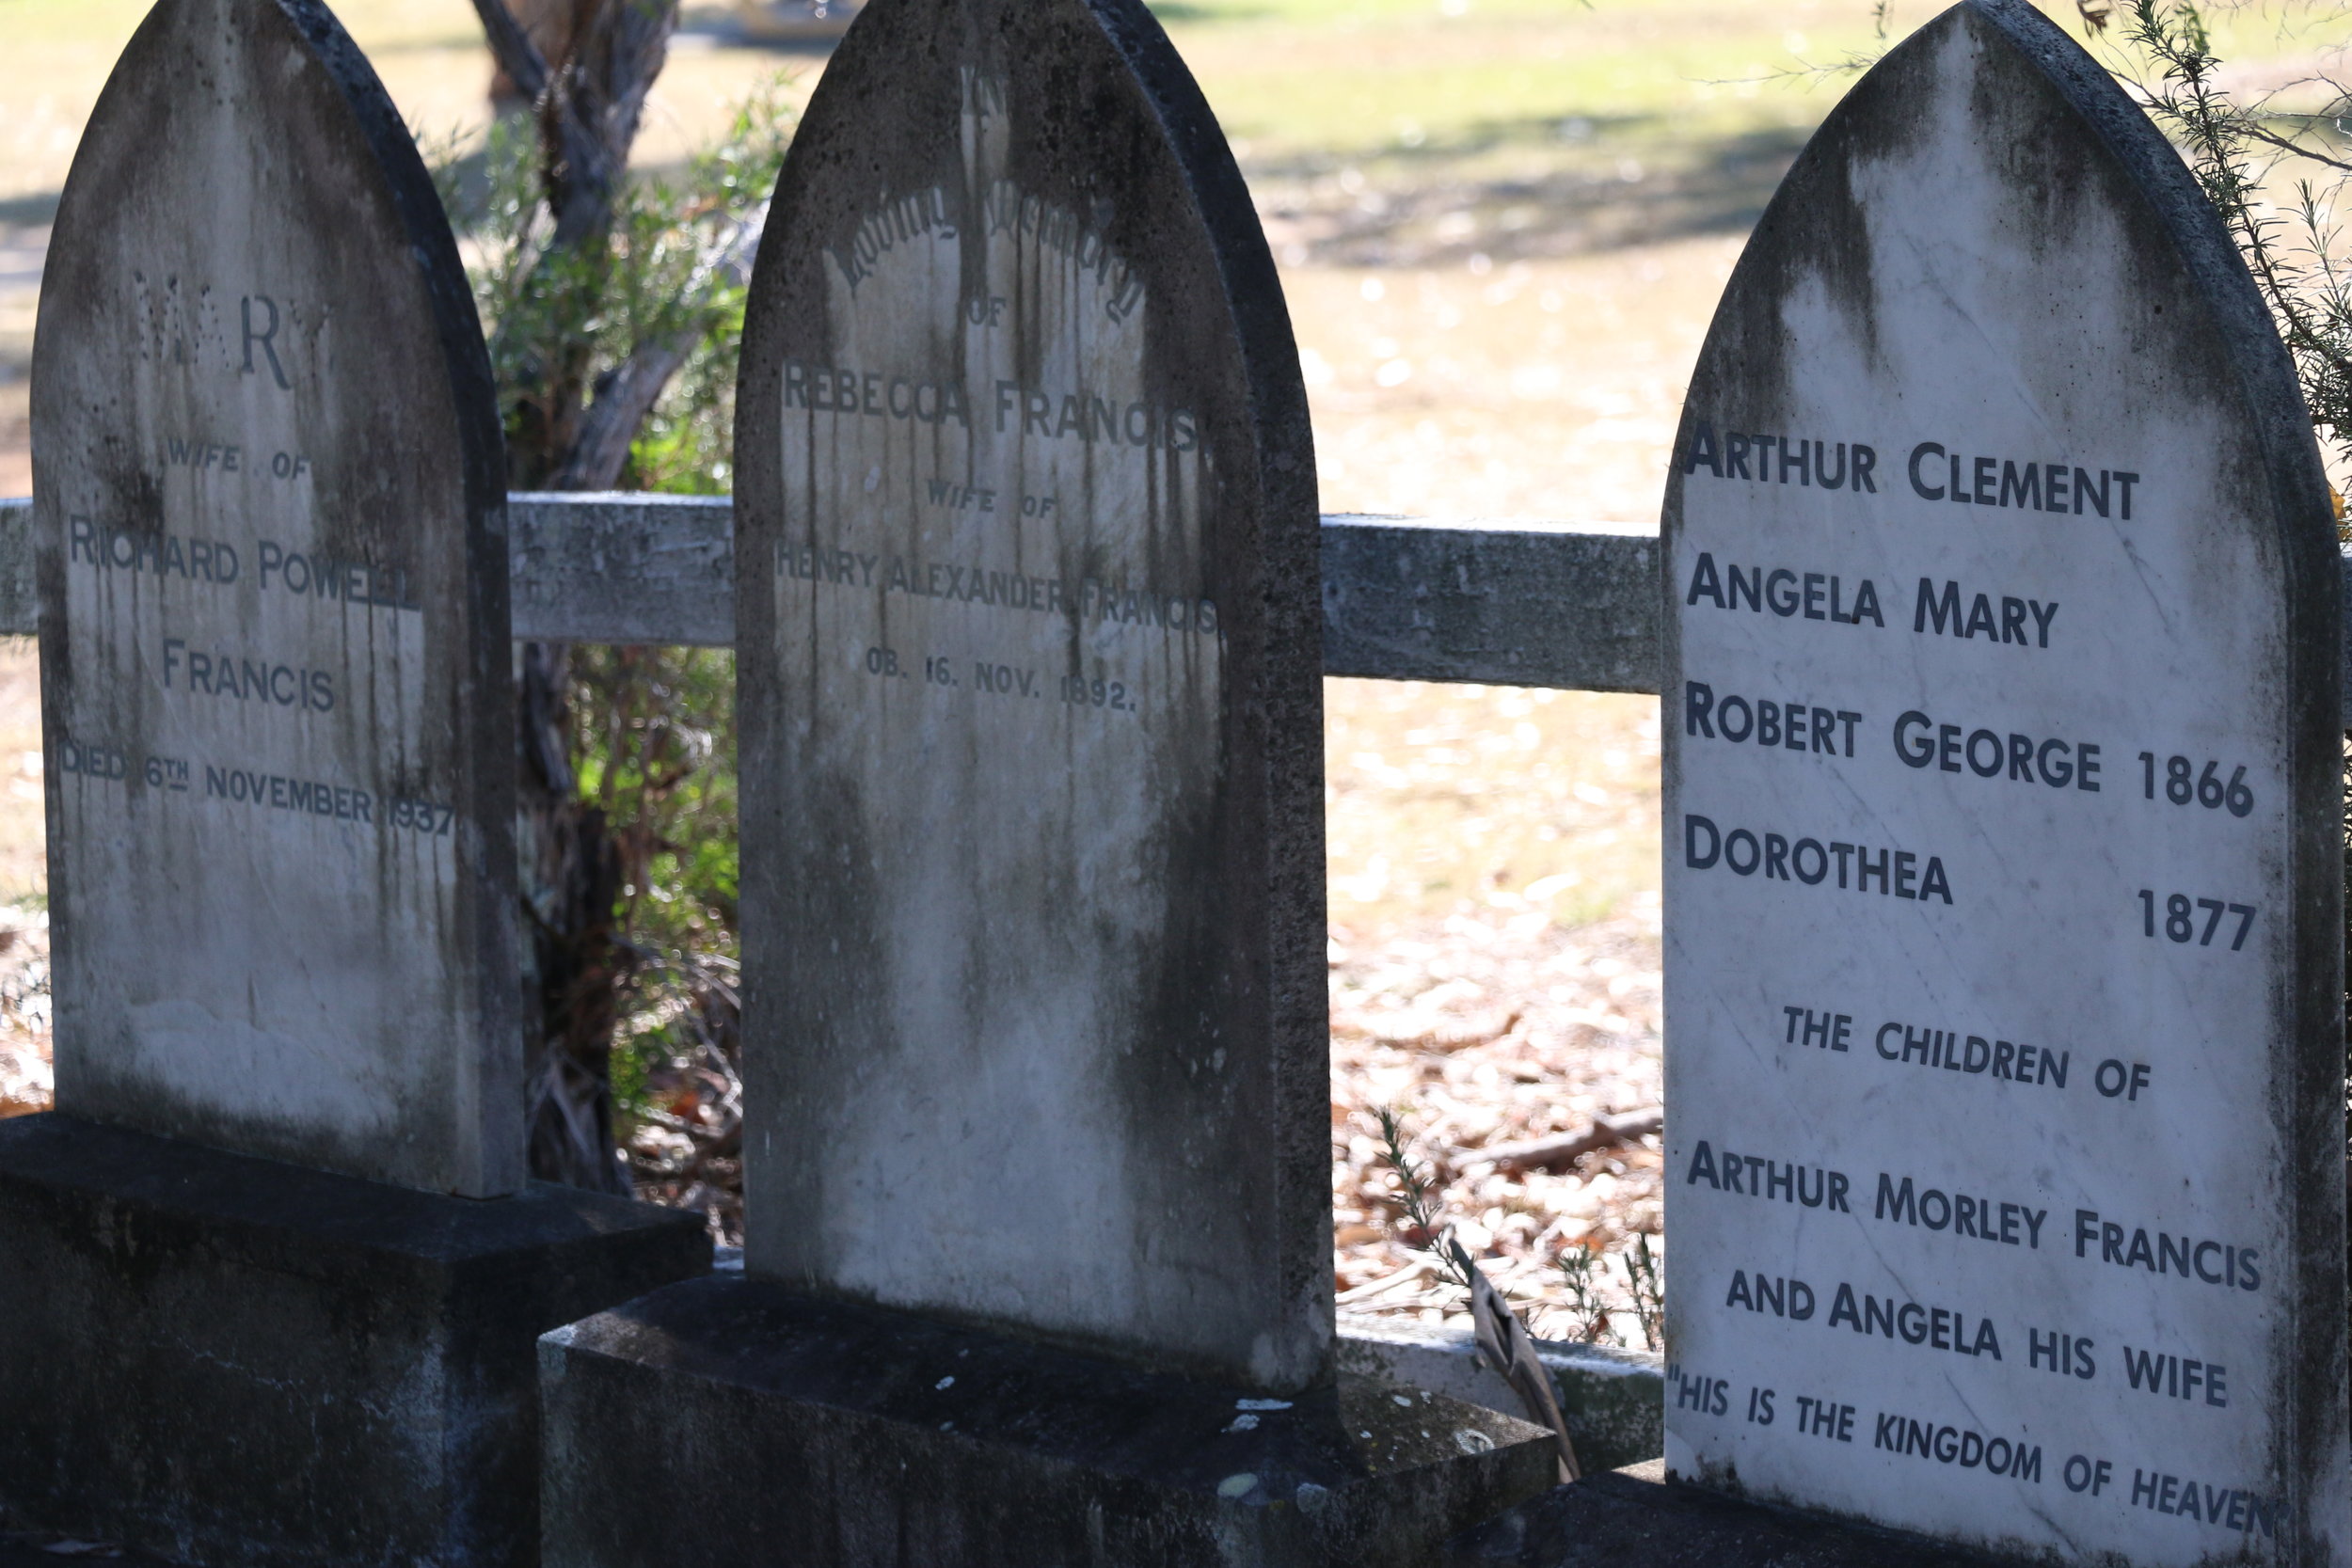  The family graves (Image: Supplied) 